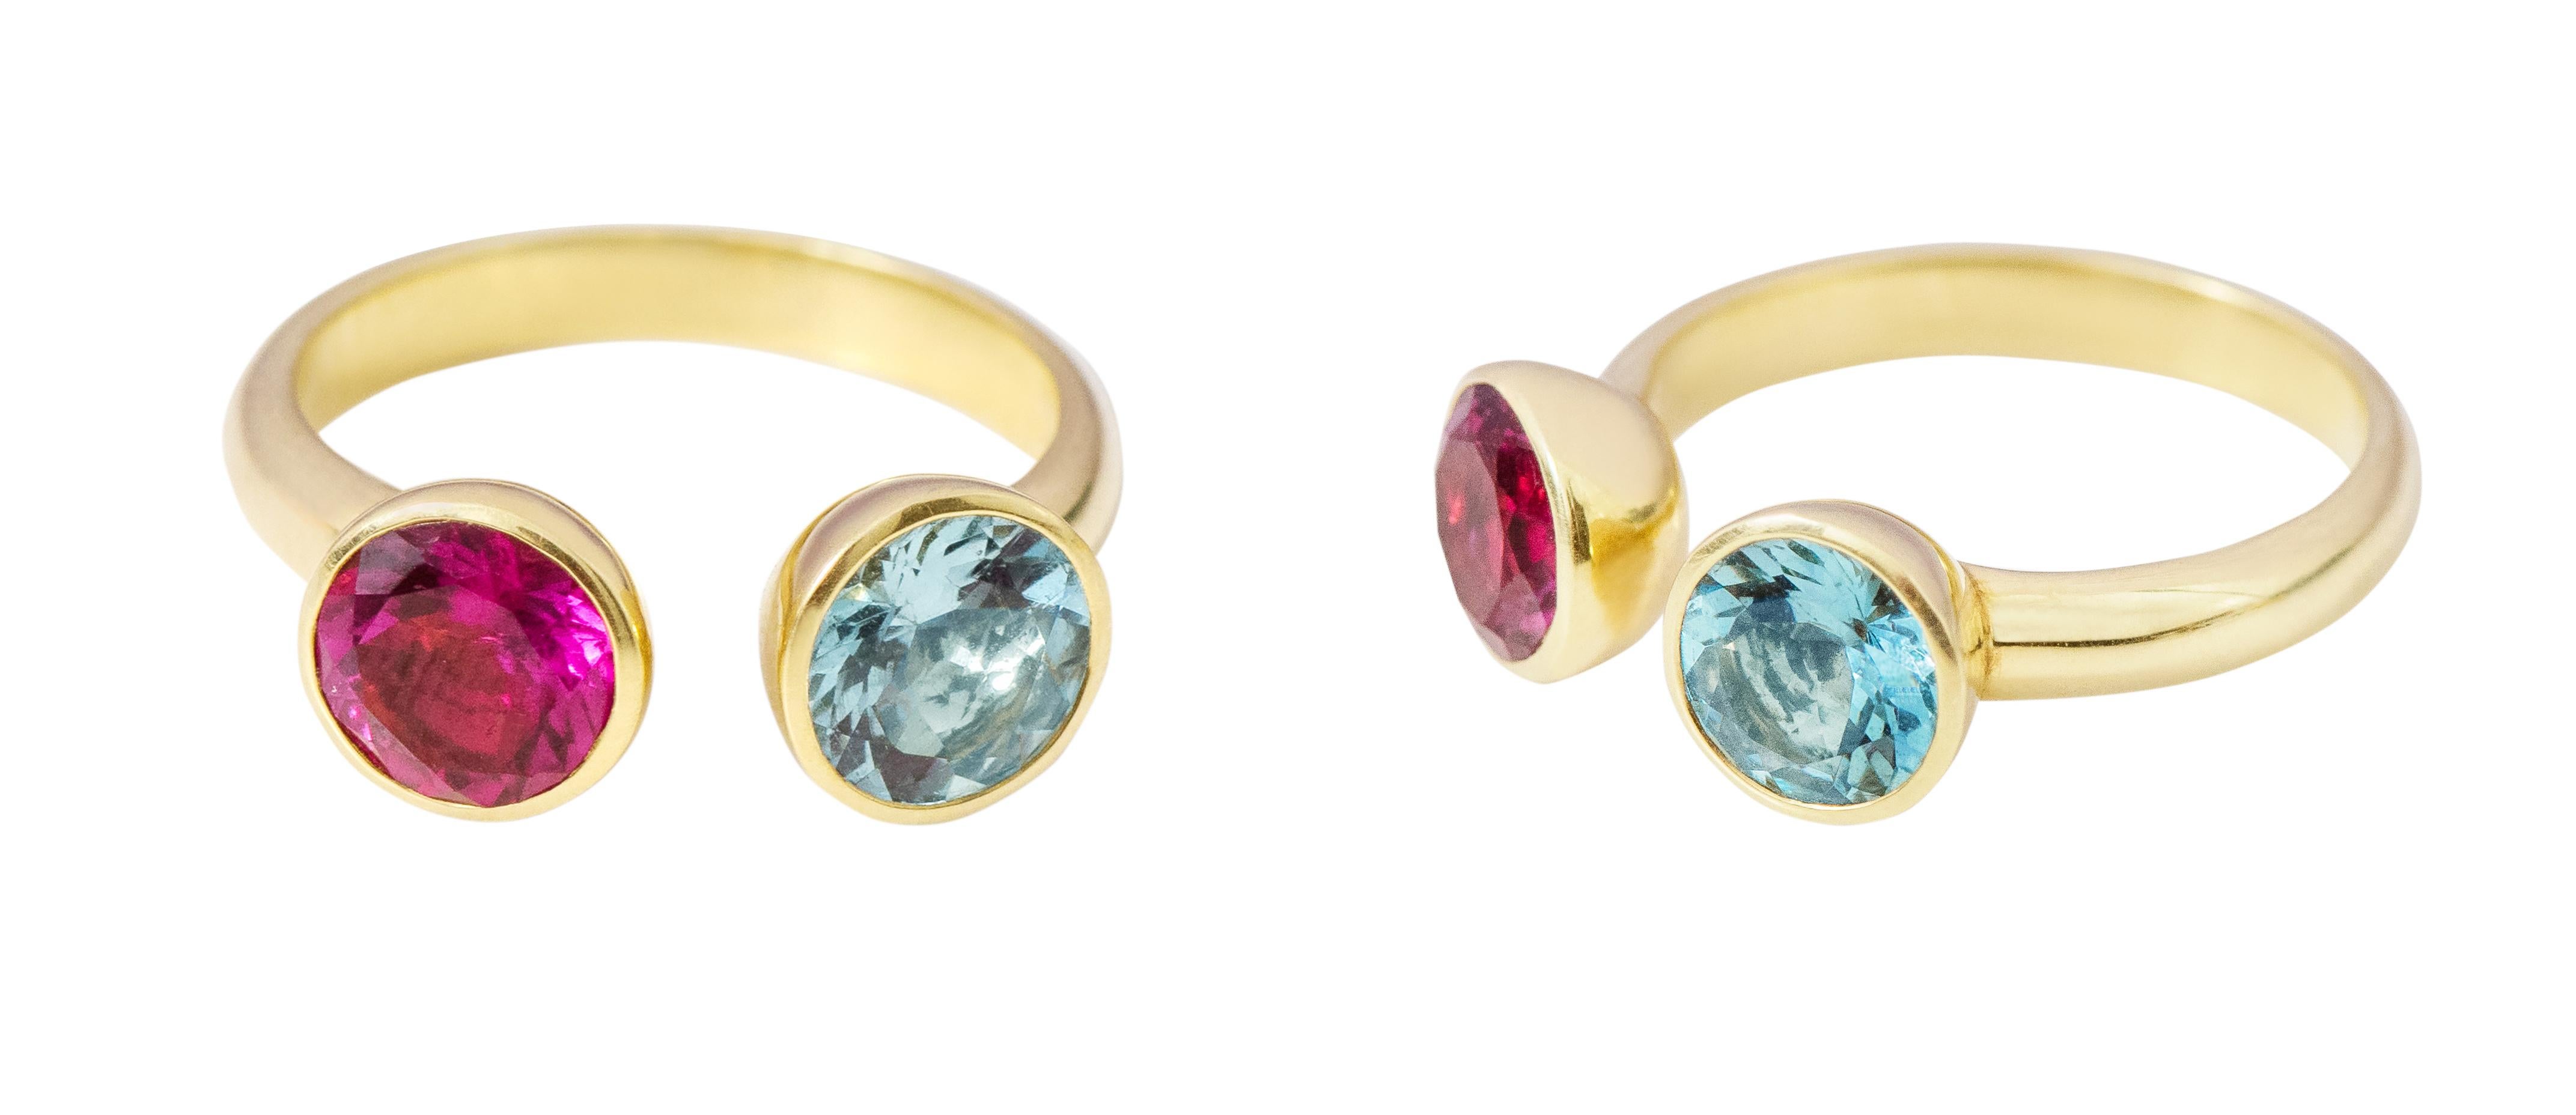 18 Karat Yellow Gold Aquamarine and Tourmaline Solitaire Ring

This distinctive vibrant magenta pink and electric blue tourmaline ring is blissful. The two solitaire brilliant round cut tourmalines in closed setting facing each other with the little